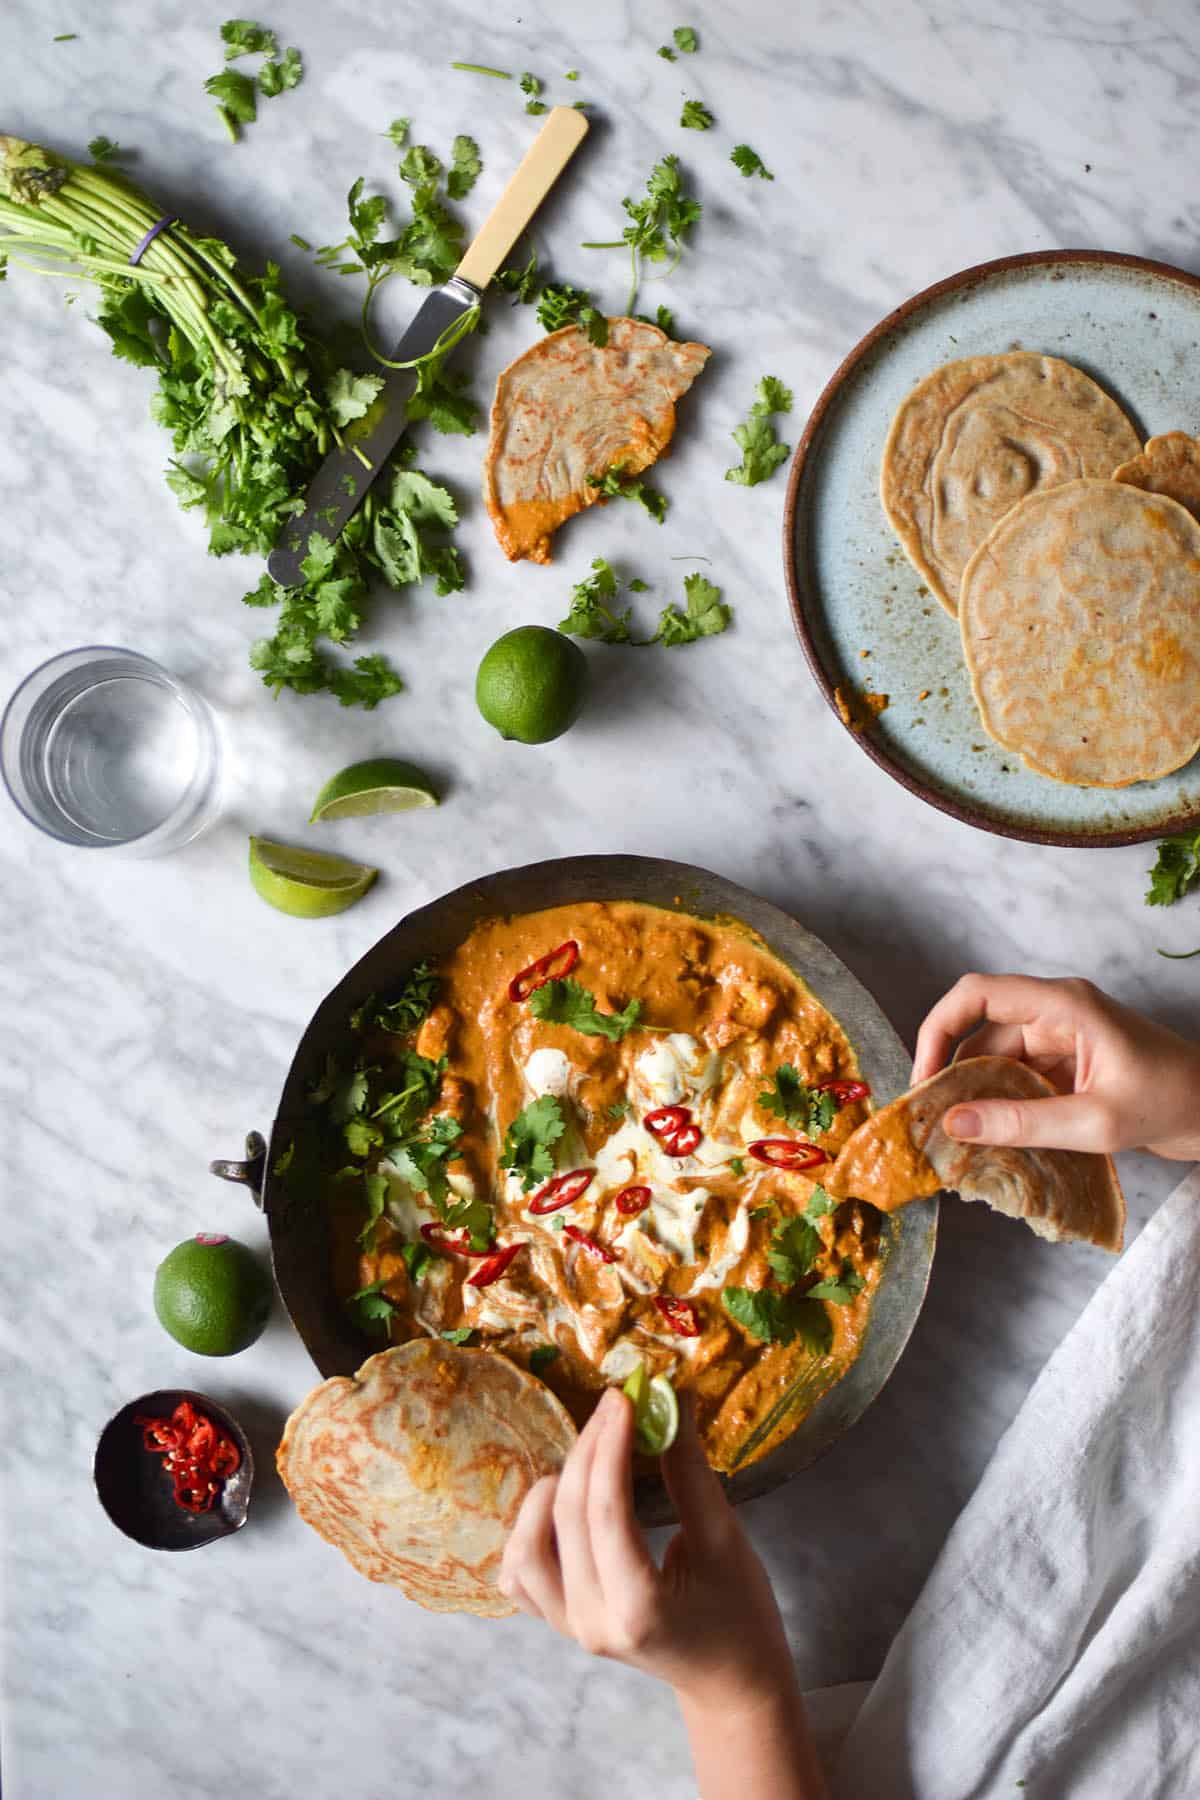 An aerial view of a marble table topped with a metal dish of FODMAP friendly shahi paneer, surrounded by casually strewn limes, chilli, coriander and gluten free yeasted flatbread. Two hands extend from the bottom left of the image to tear a flatbread and dip it into the curry, which is topped with coriander, chillies and a swirl of cream